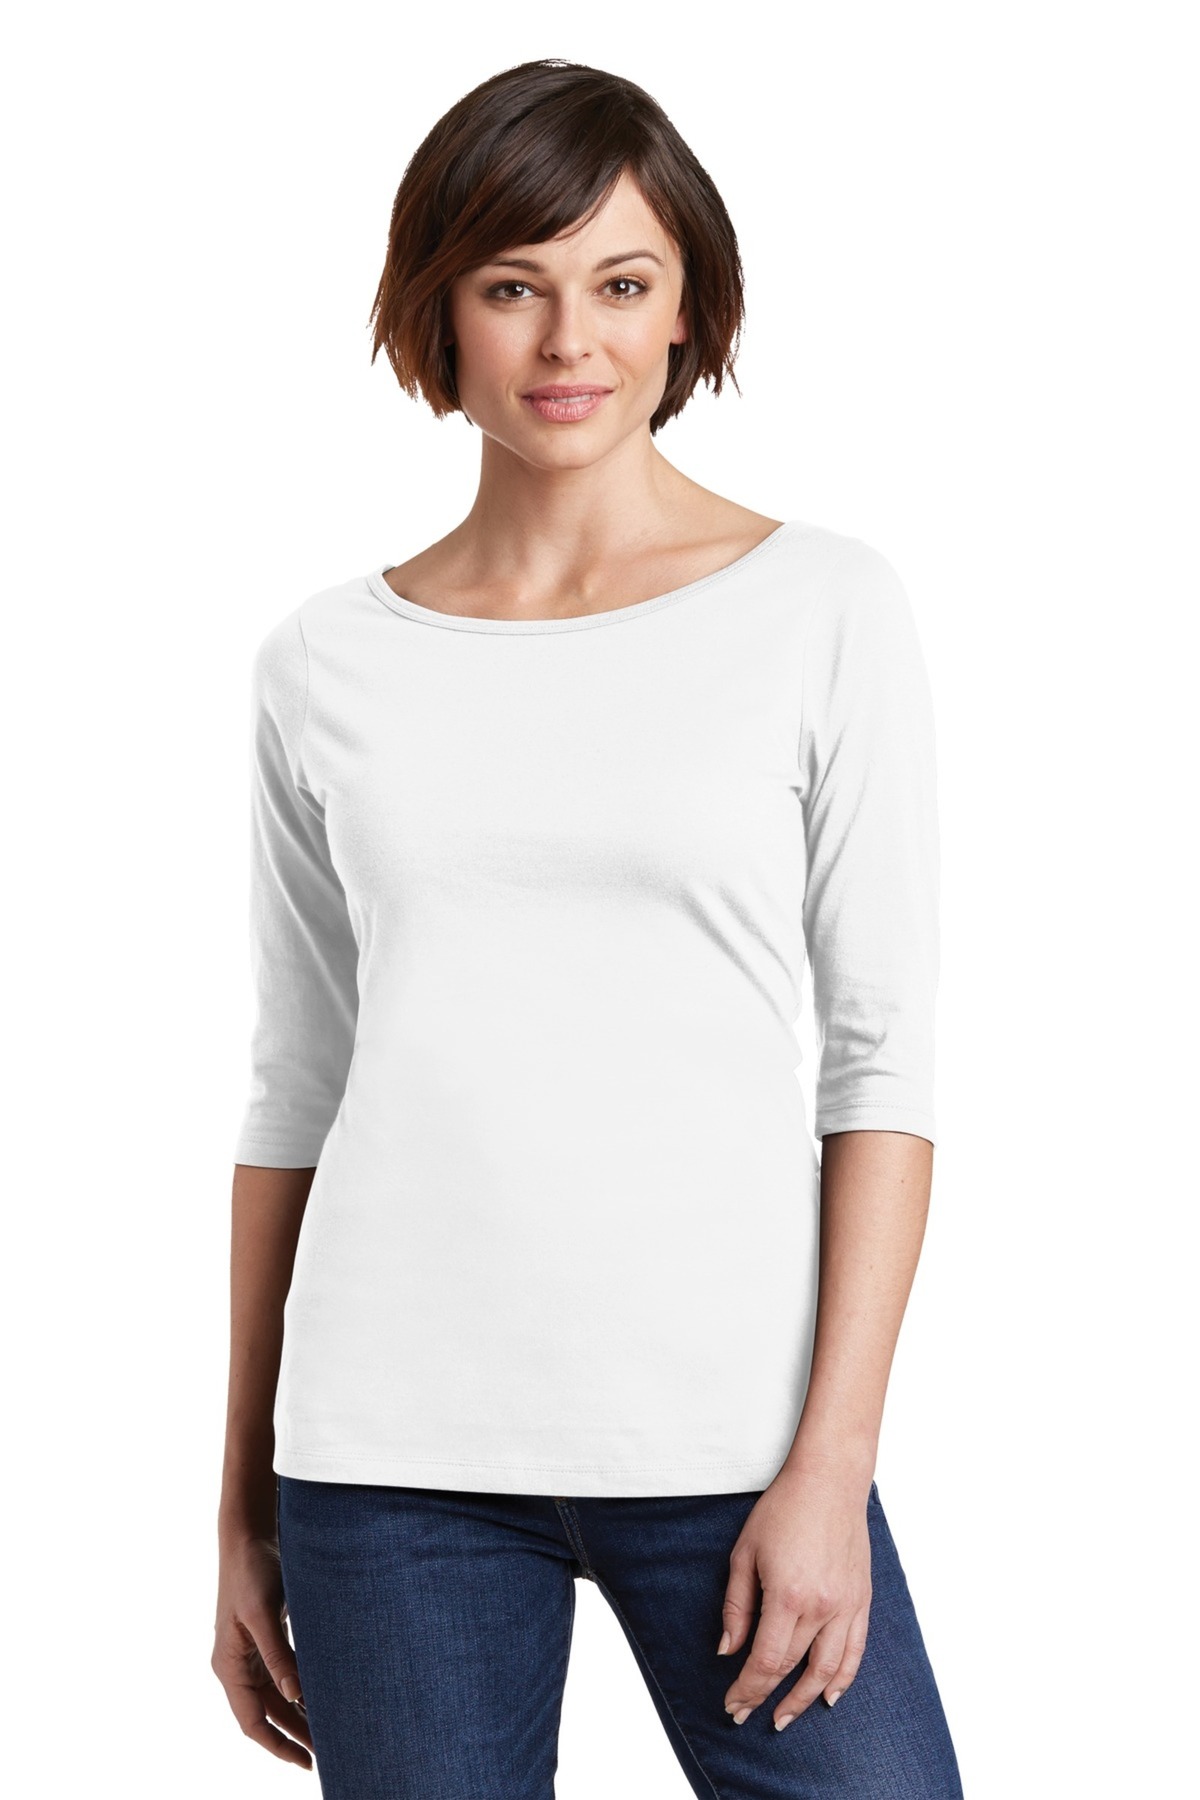 District Made Printed Women's Perfect Weight 3/4-Sleeve Tee | Women's ...